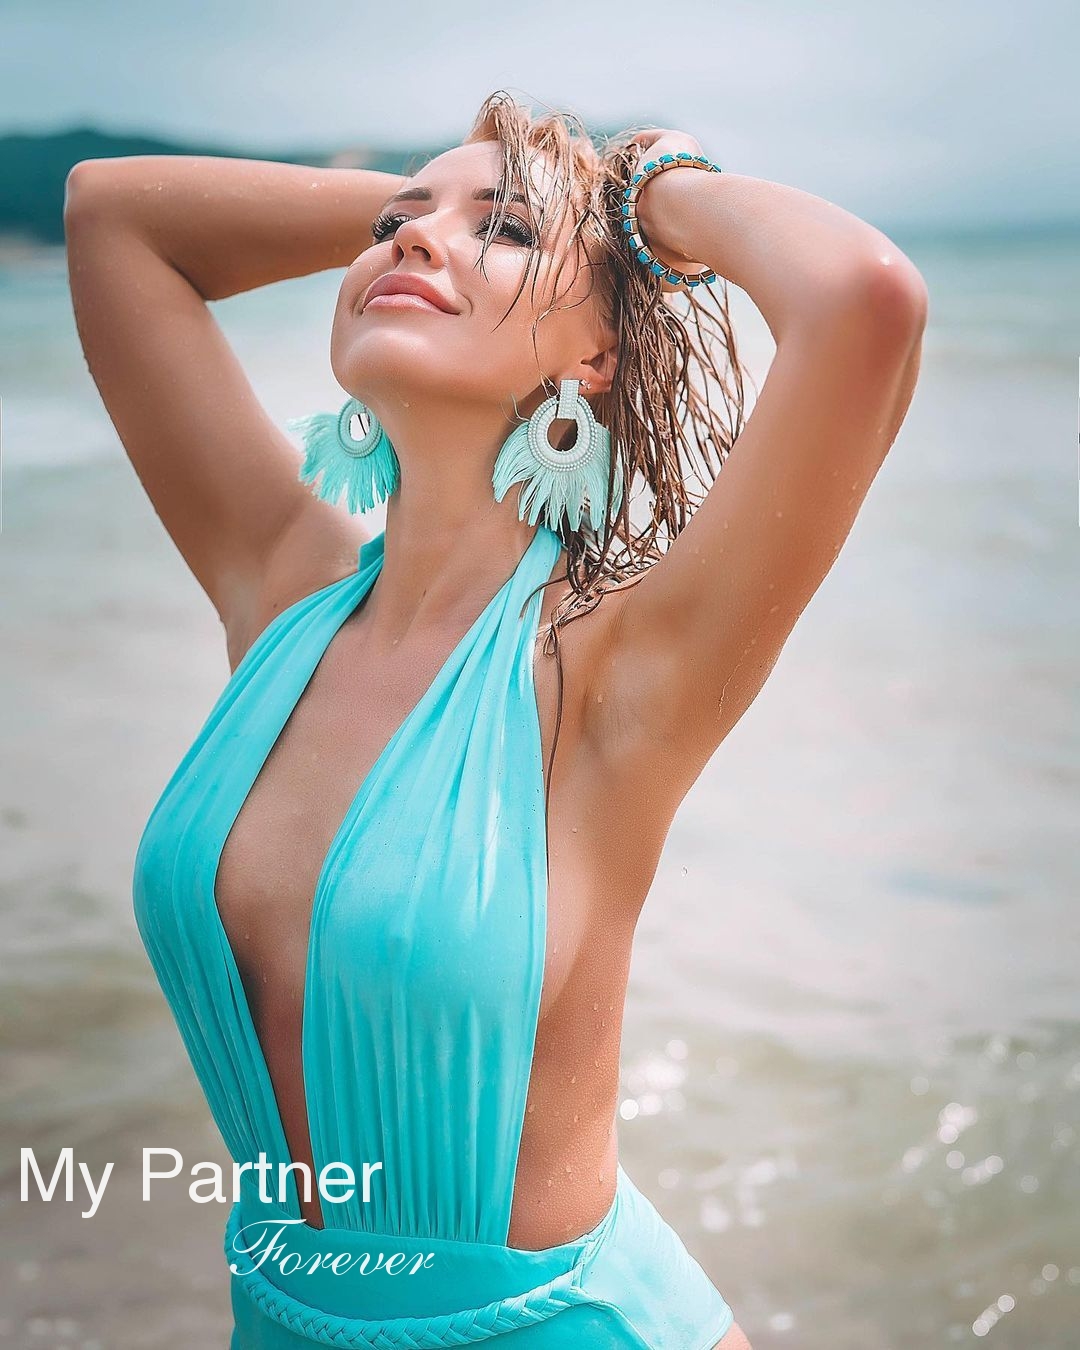 Charming Lady from Russia - Kristina from Almaty, Kazakhstan